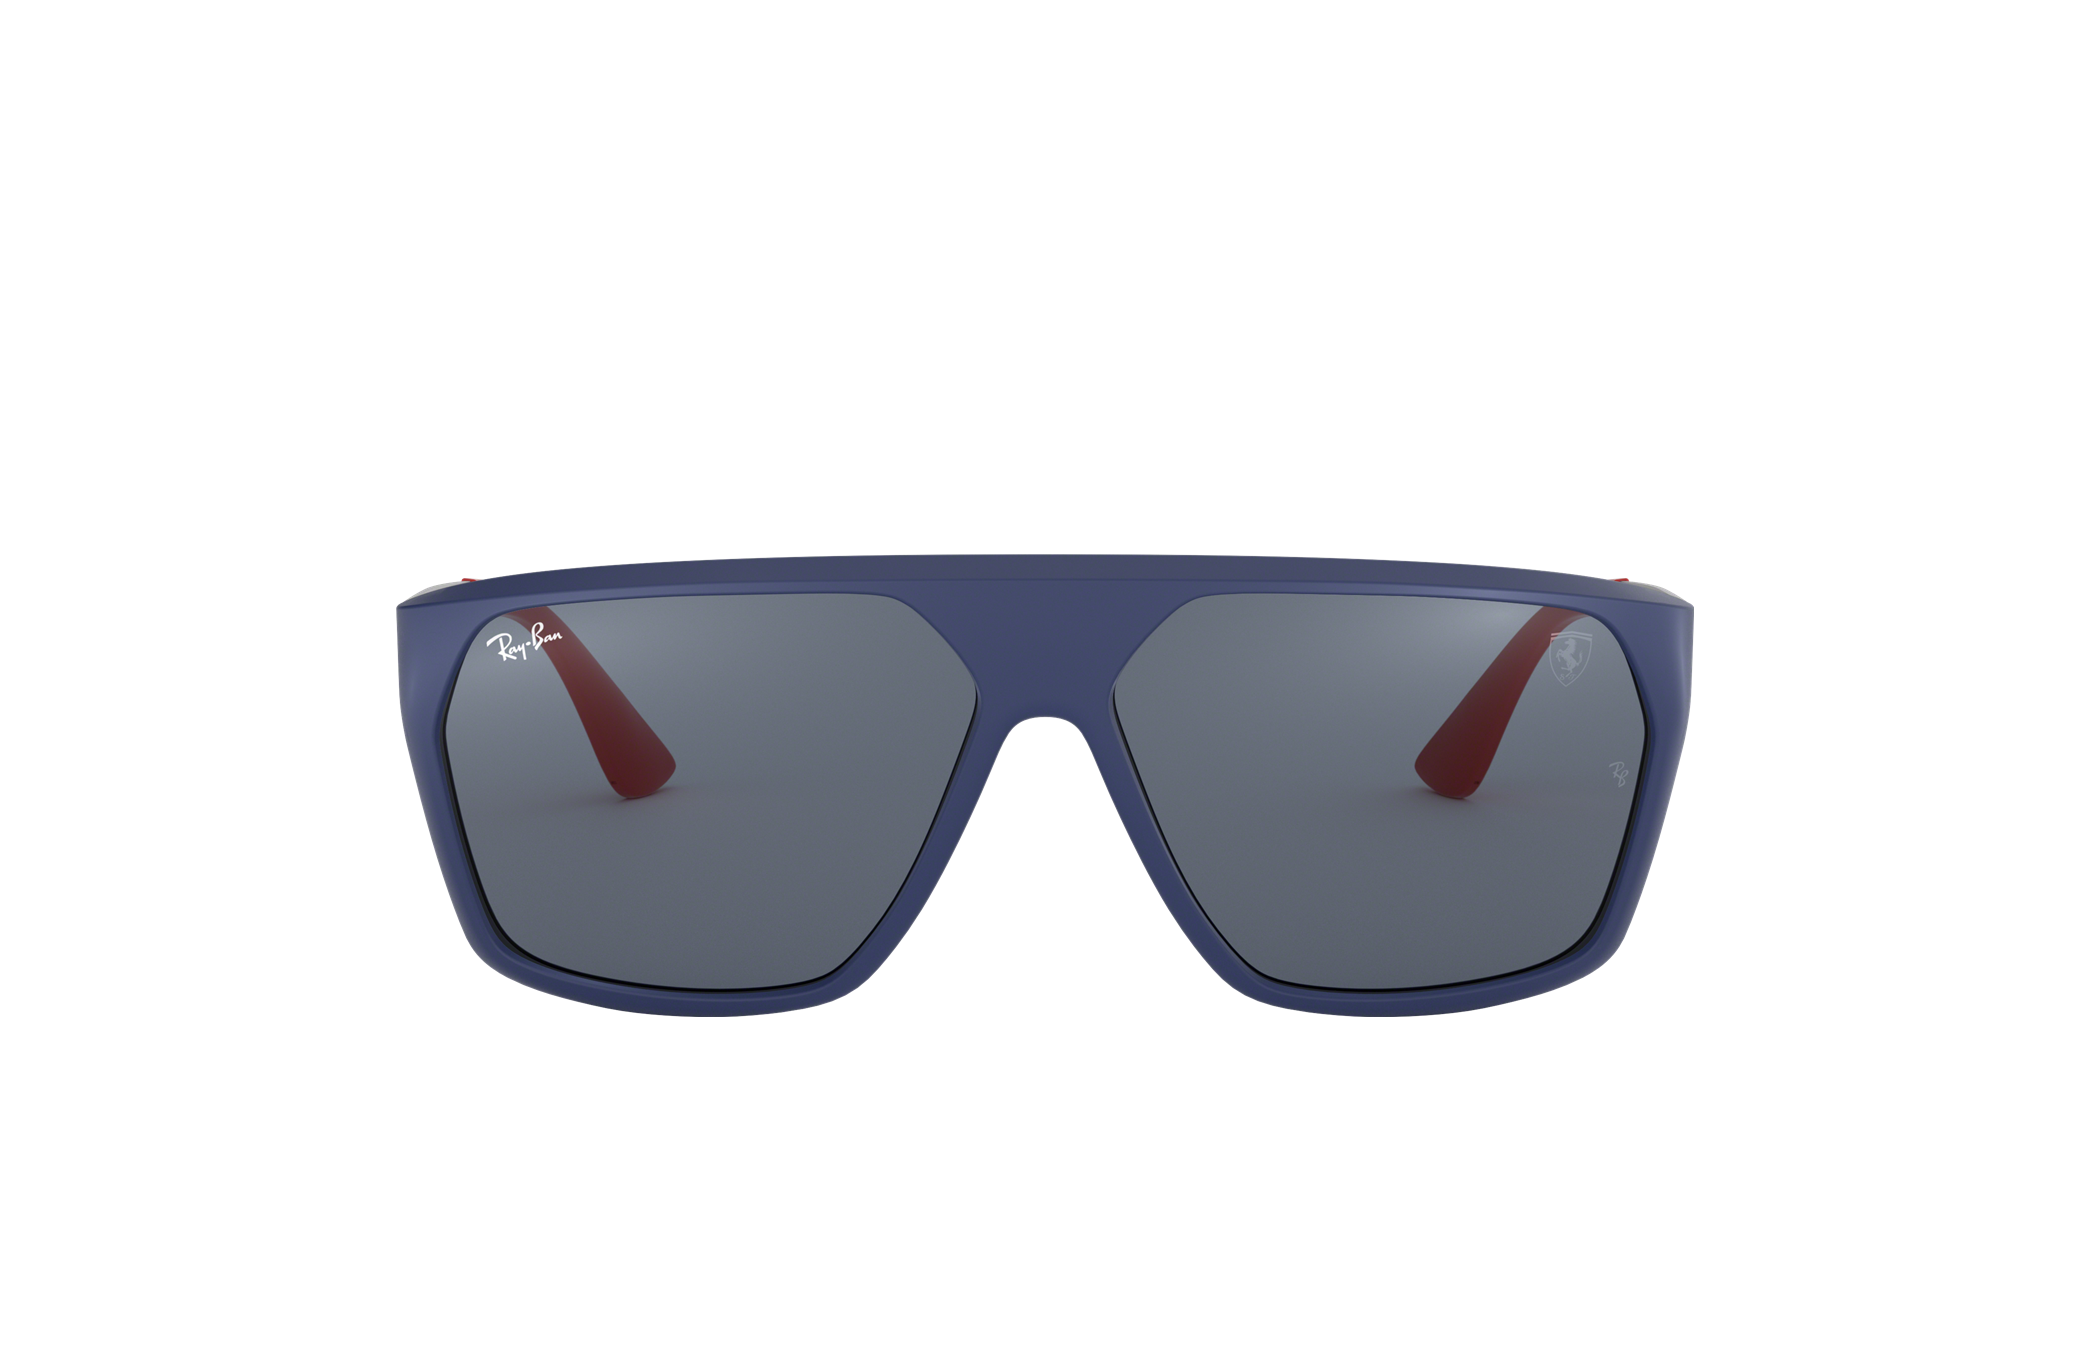 www ray ban com online store